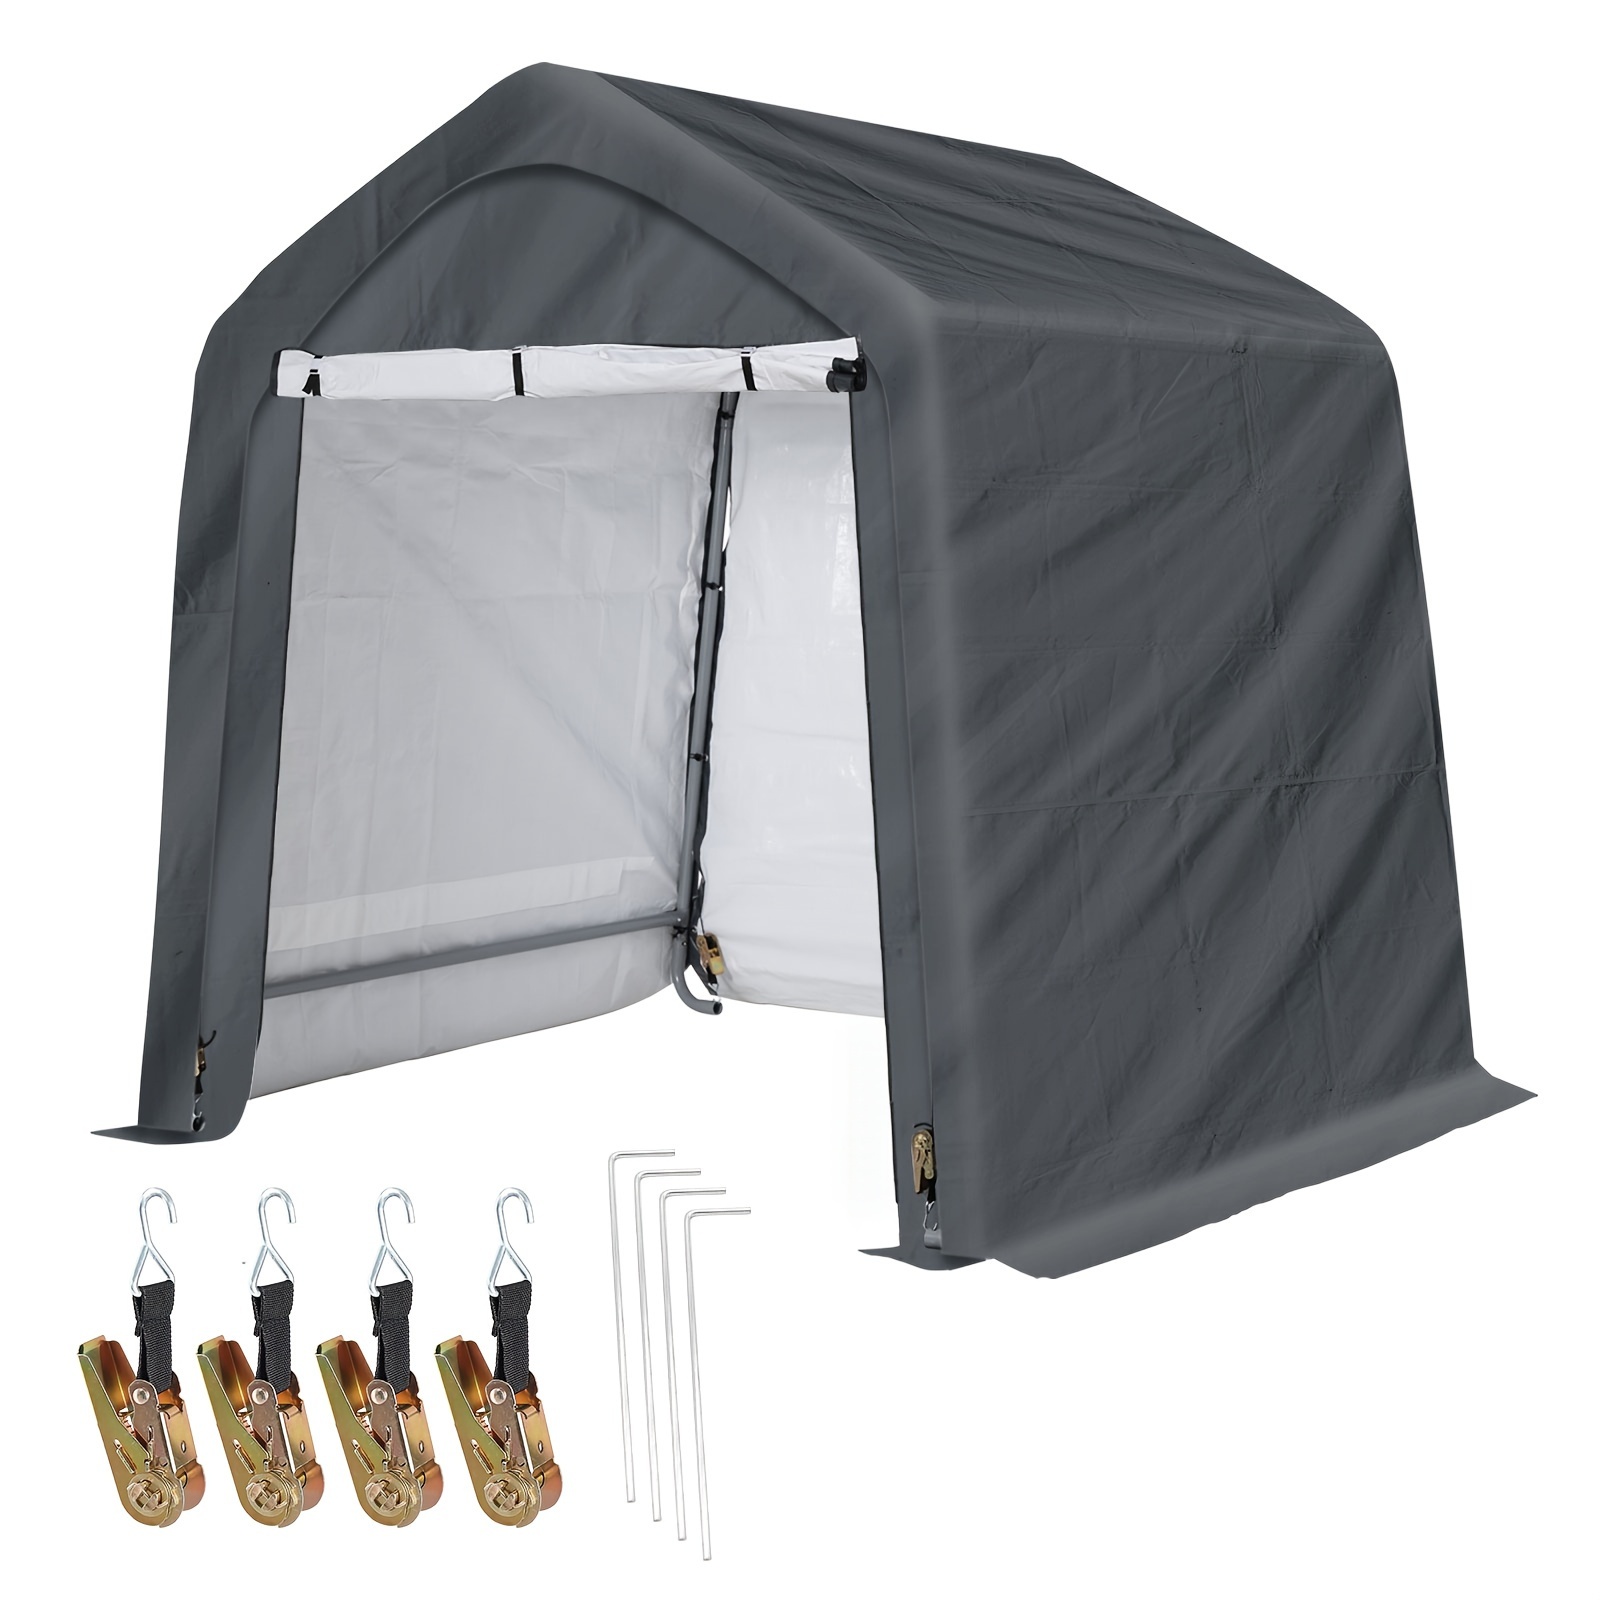 

Heavy Duty Storage Shelter, Portable Shed Carport With Roll-up Zipper Door, Waterproof And Uv Resistant - 6'×6'